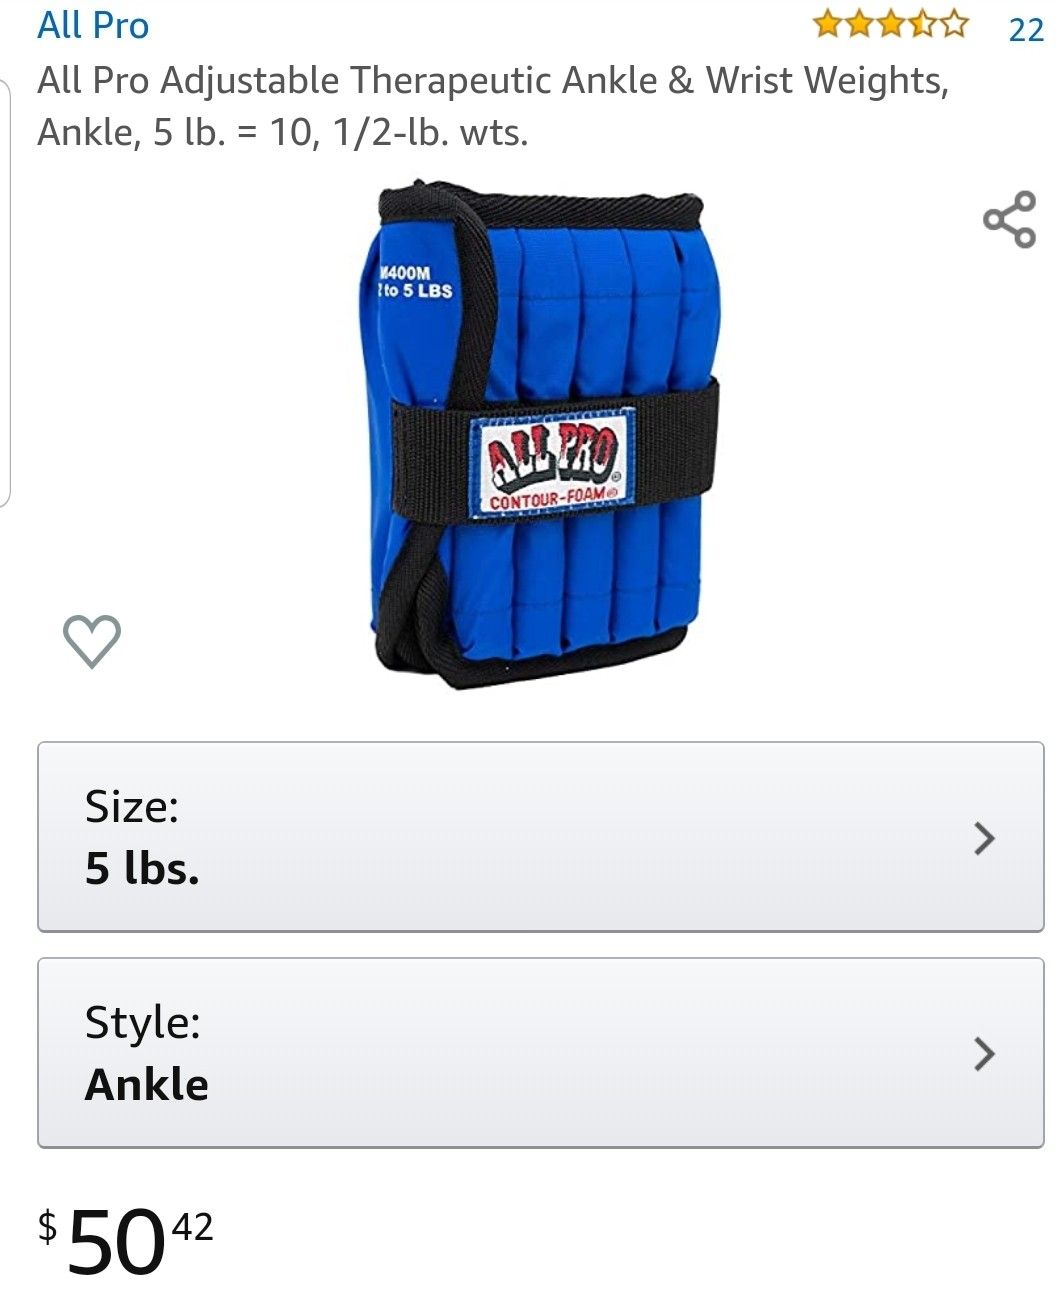 All Pro 10lb Adjustable Ankle Weights